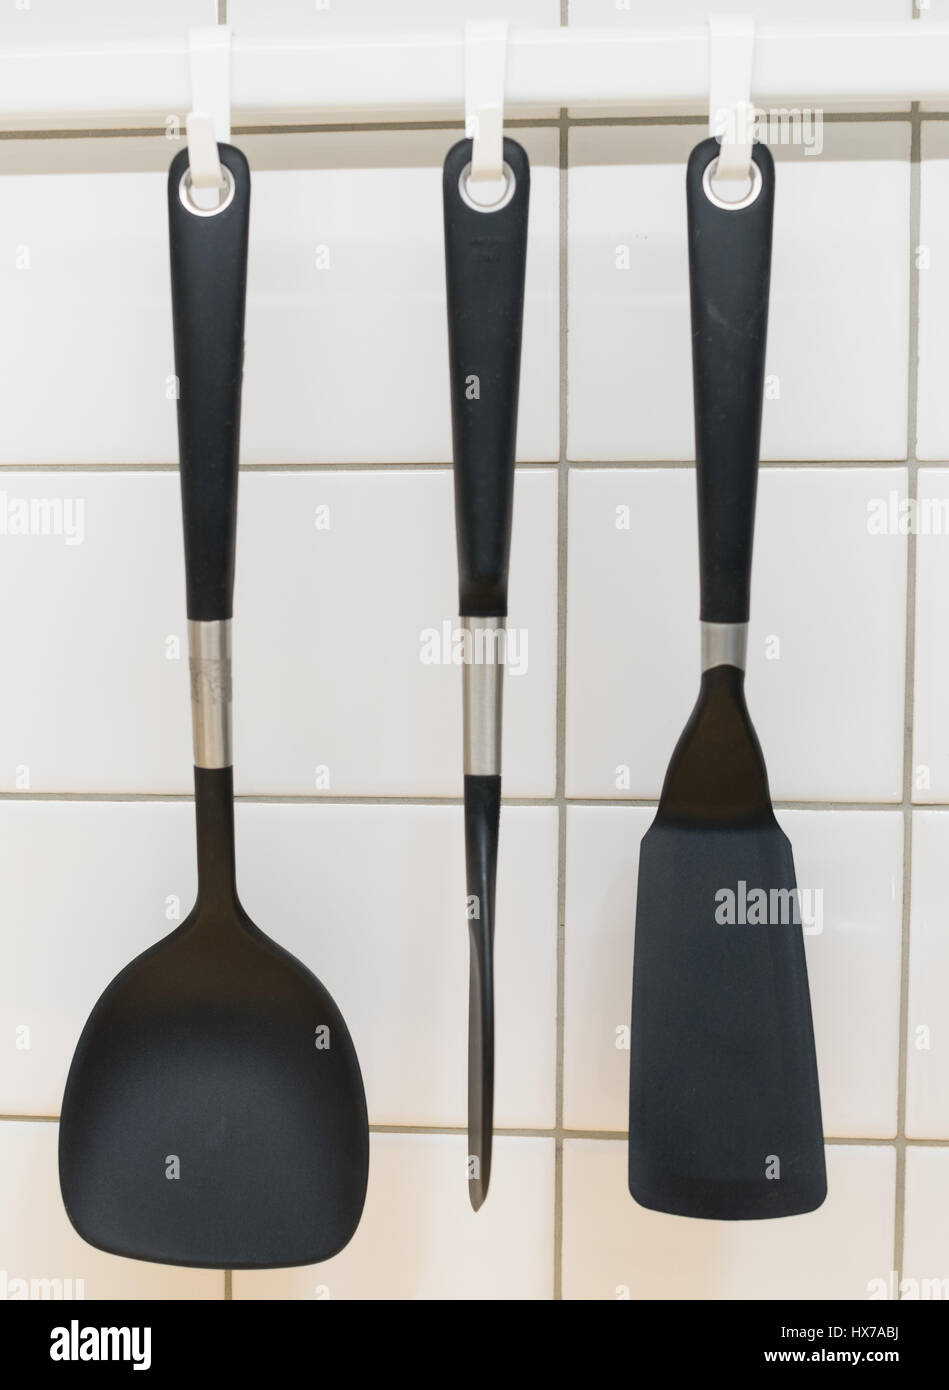 Black cooking utensils haning on the wall Stock Photo